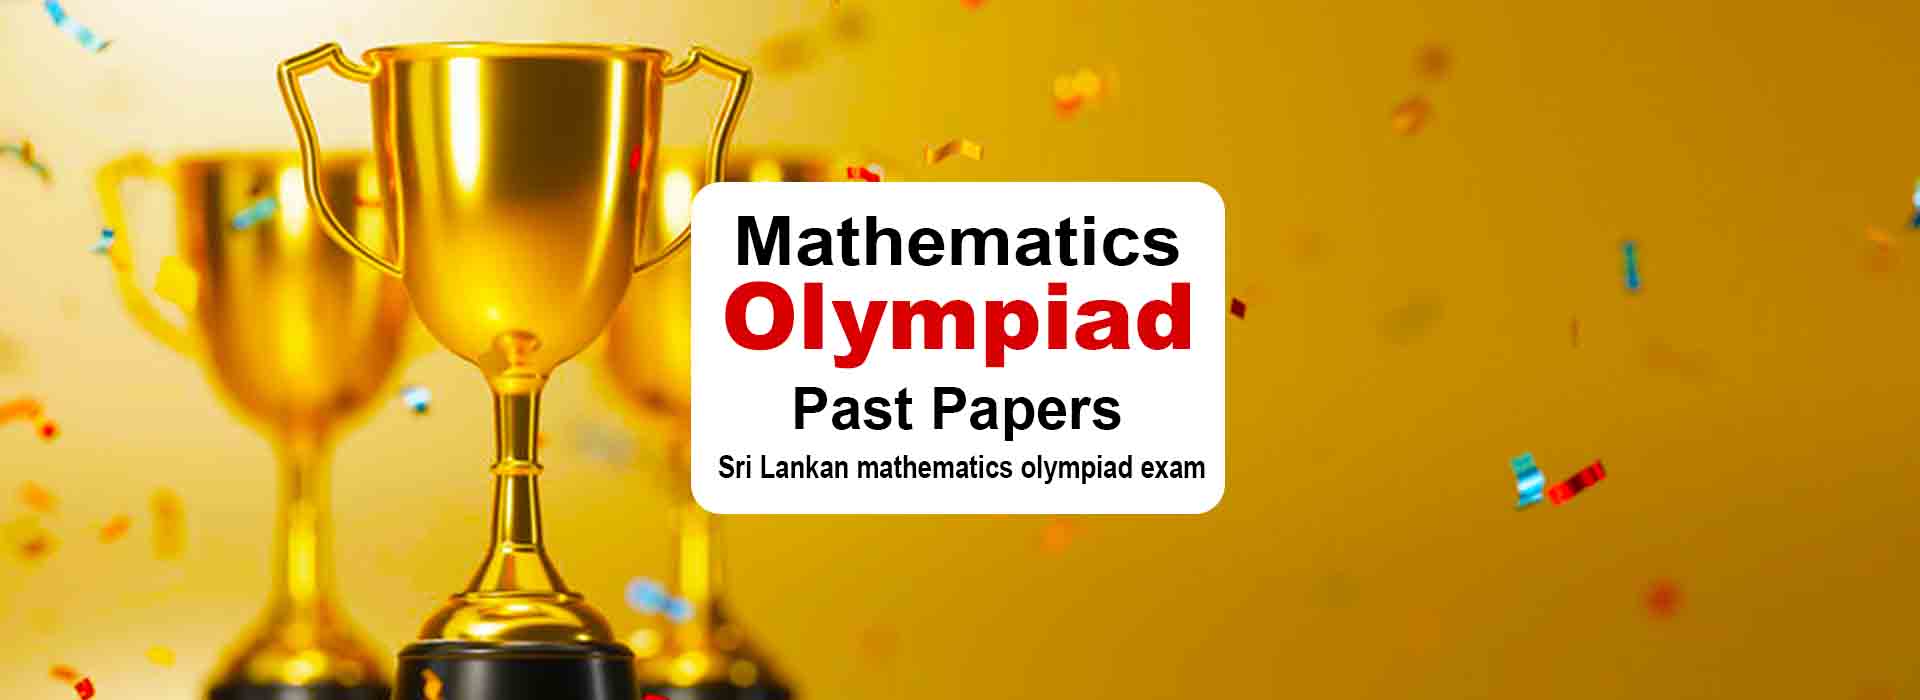 International Mathematics Olympiad Exam Past Papers Archives